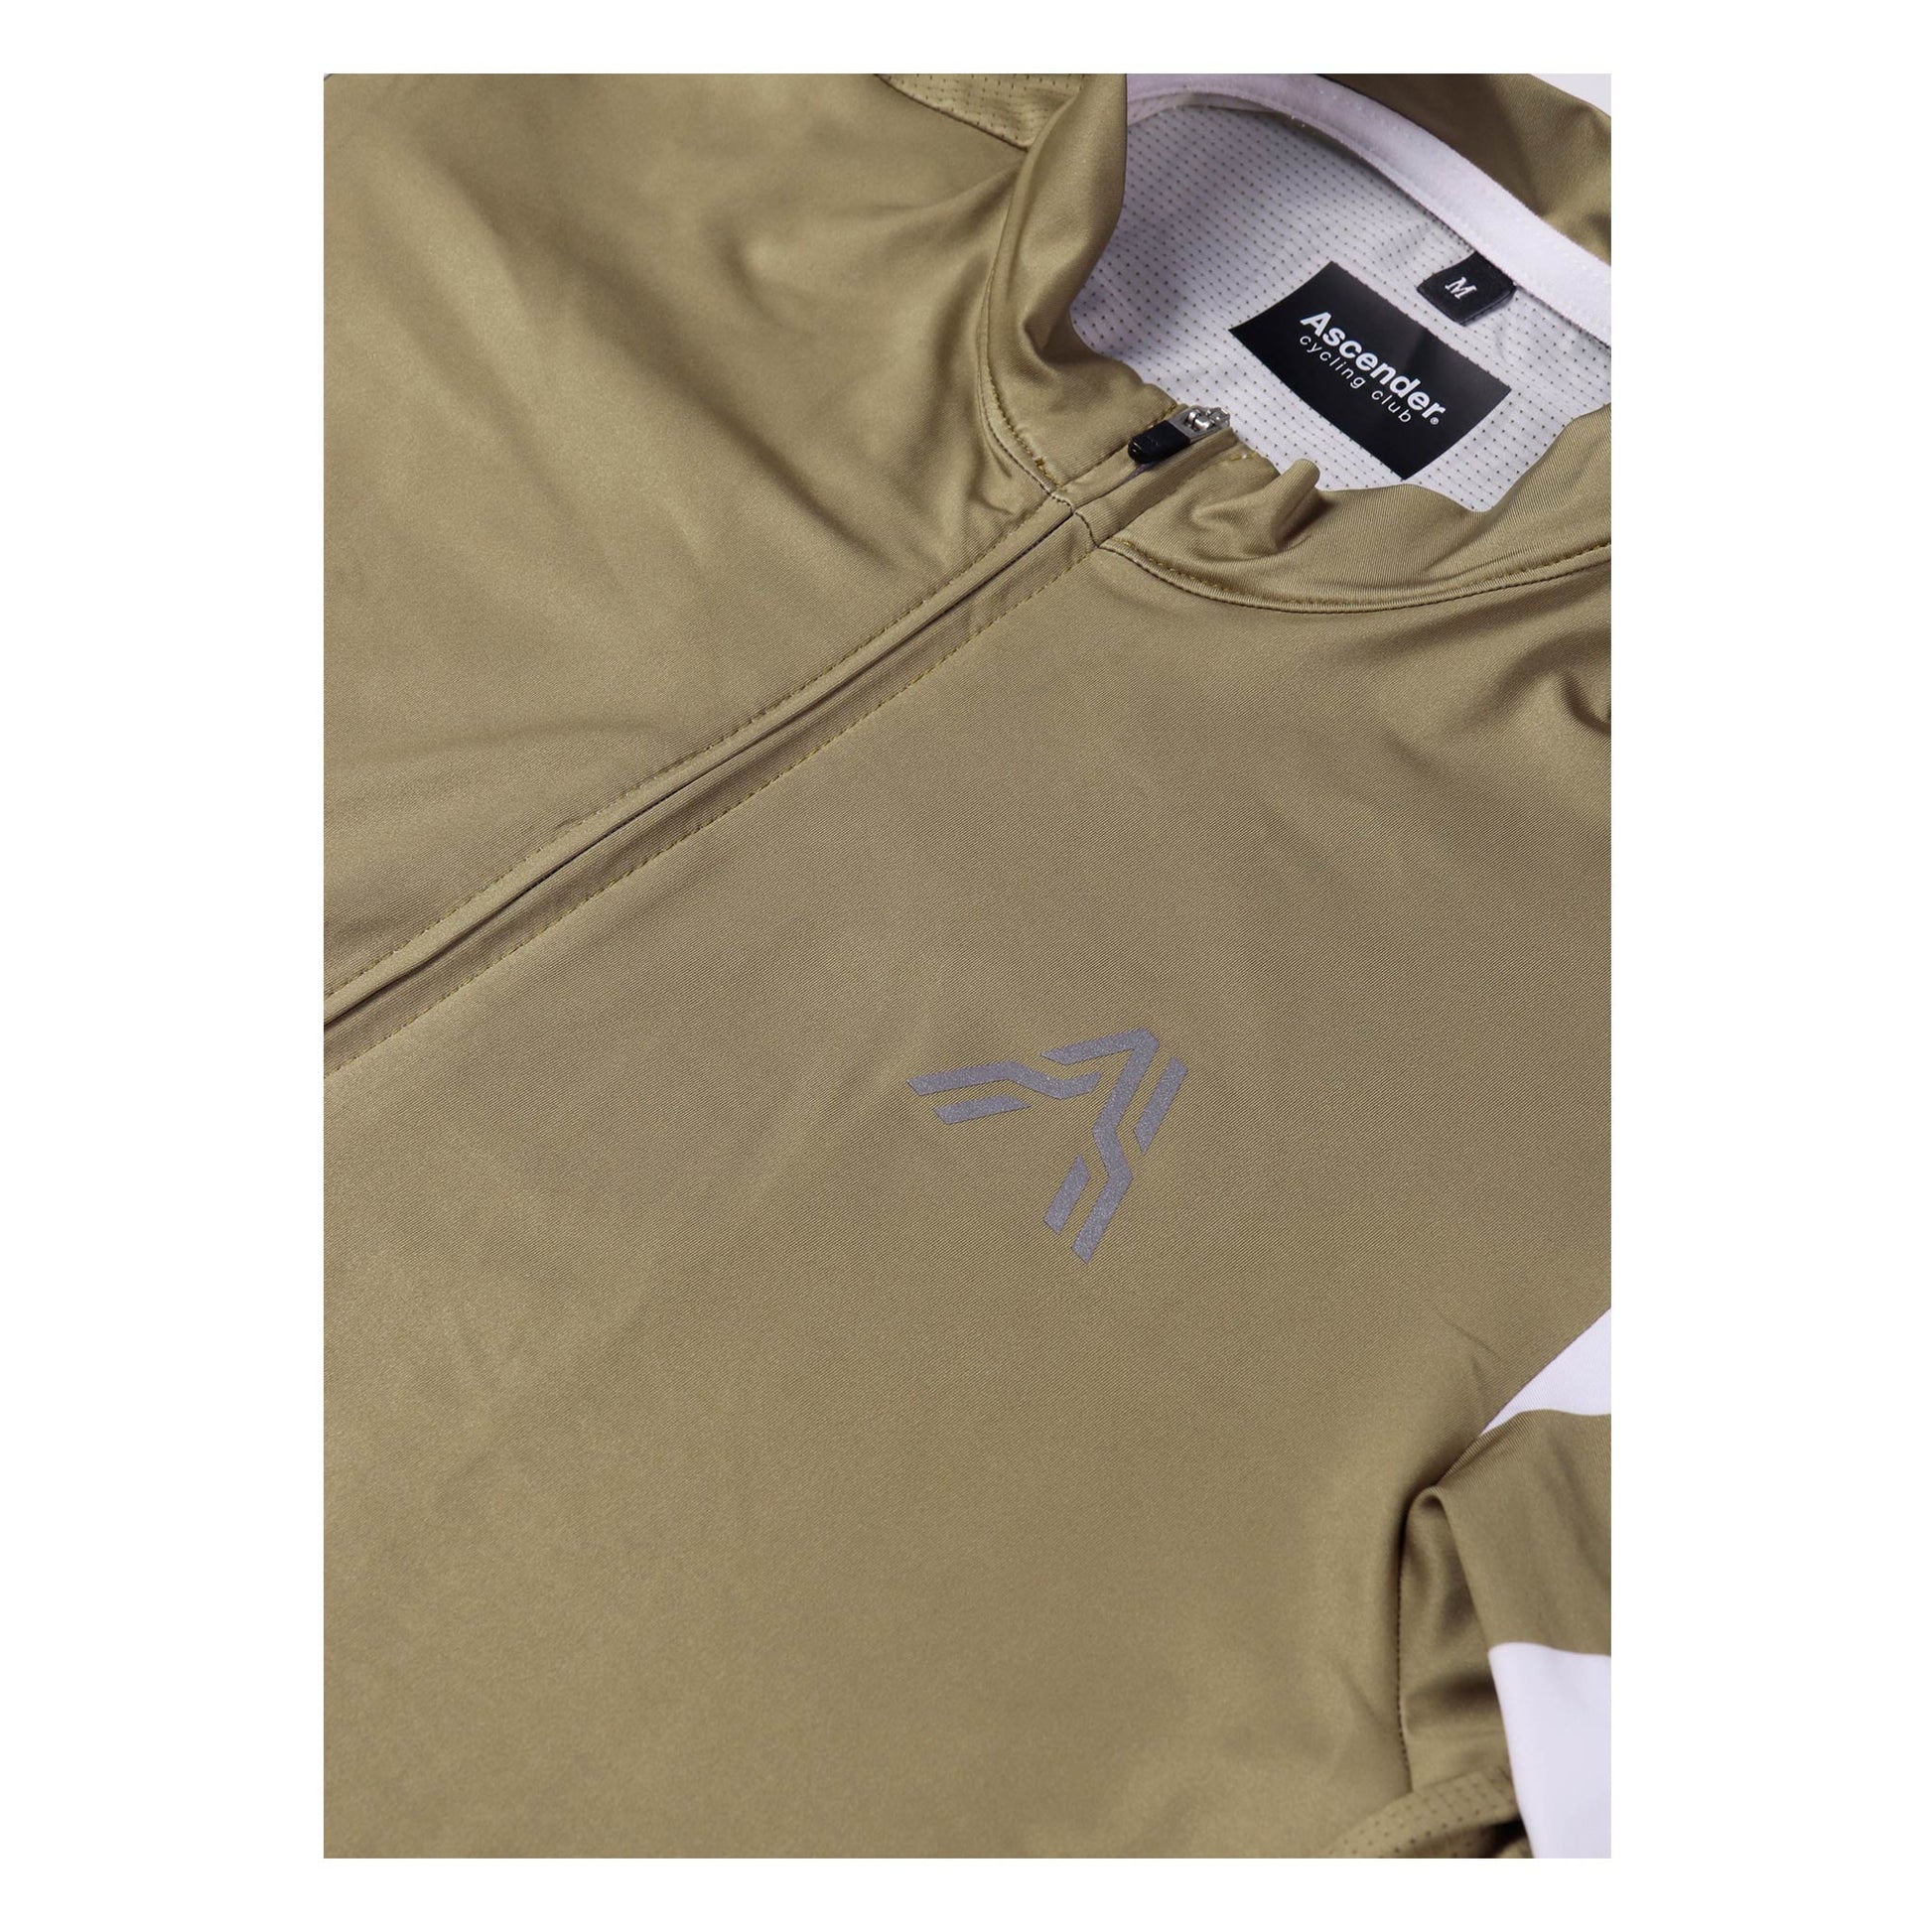 The retro-inspired Astro jersey Mystic Gold from Ascender Cycling Club Switzerland Frontside View & Reflective Logo